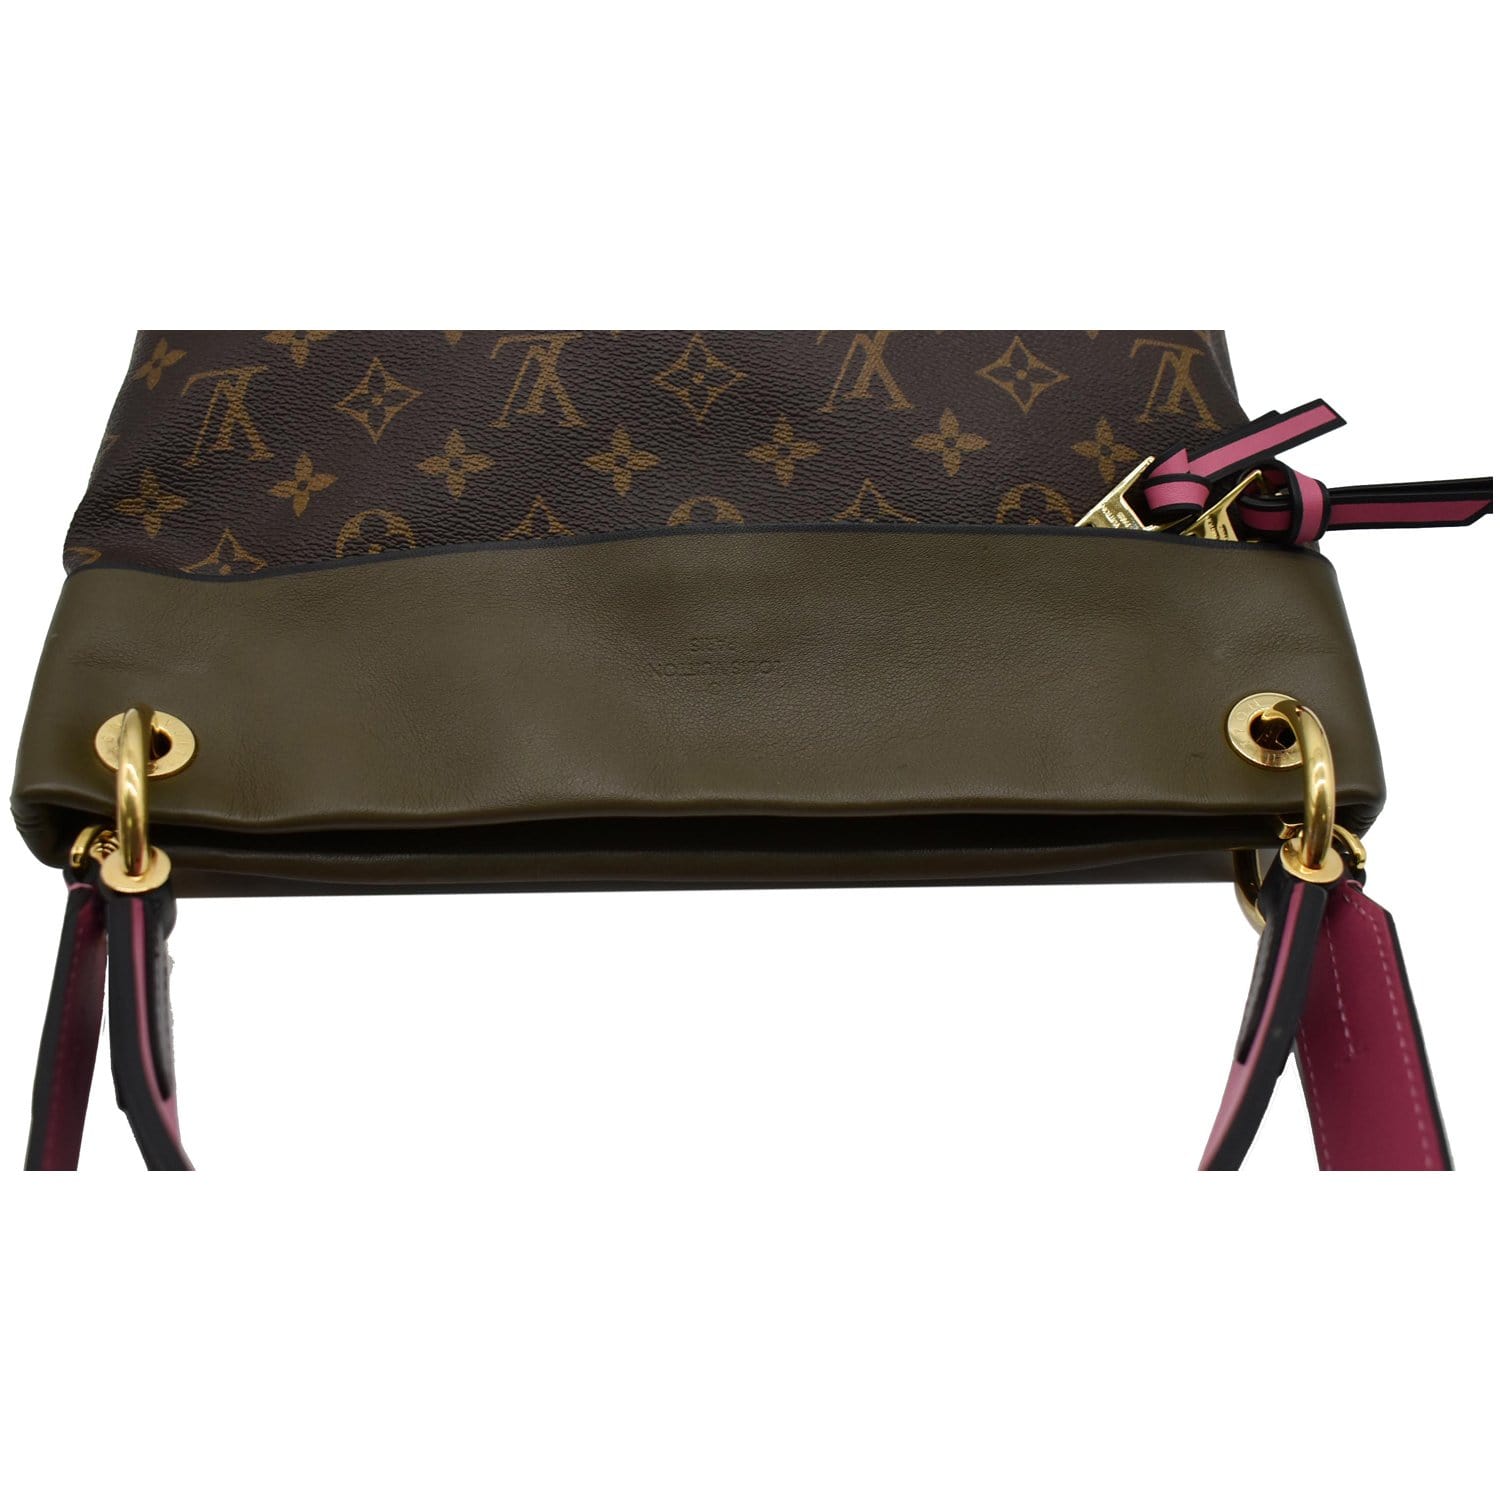 Tuileries Besace Bag Monogram Canvas With Leather